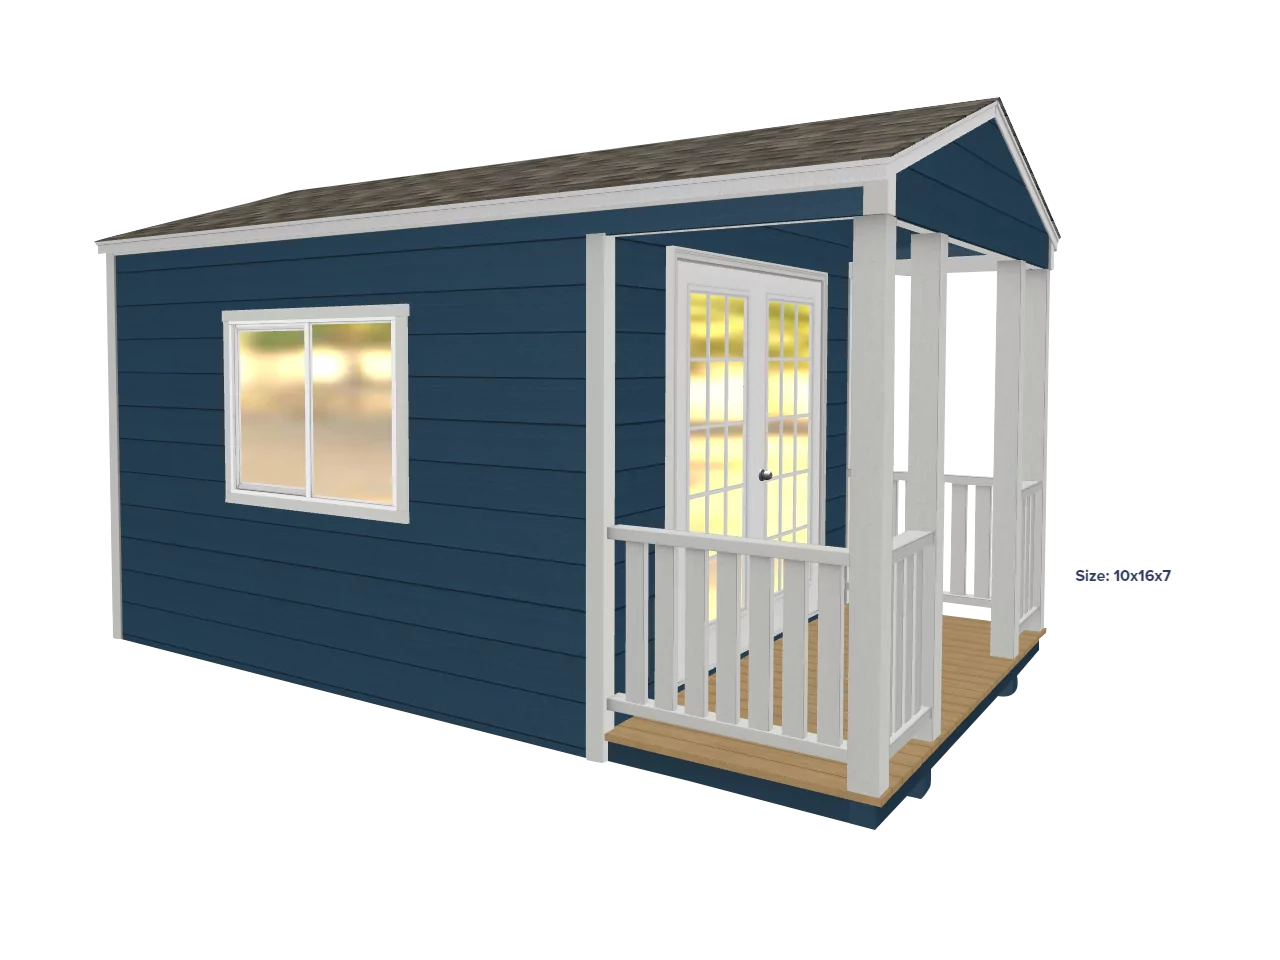 This is a cute blue she-shed with white trim equipped plenty of natural light and double french doors for the distinguished lady.